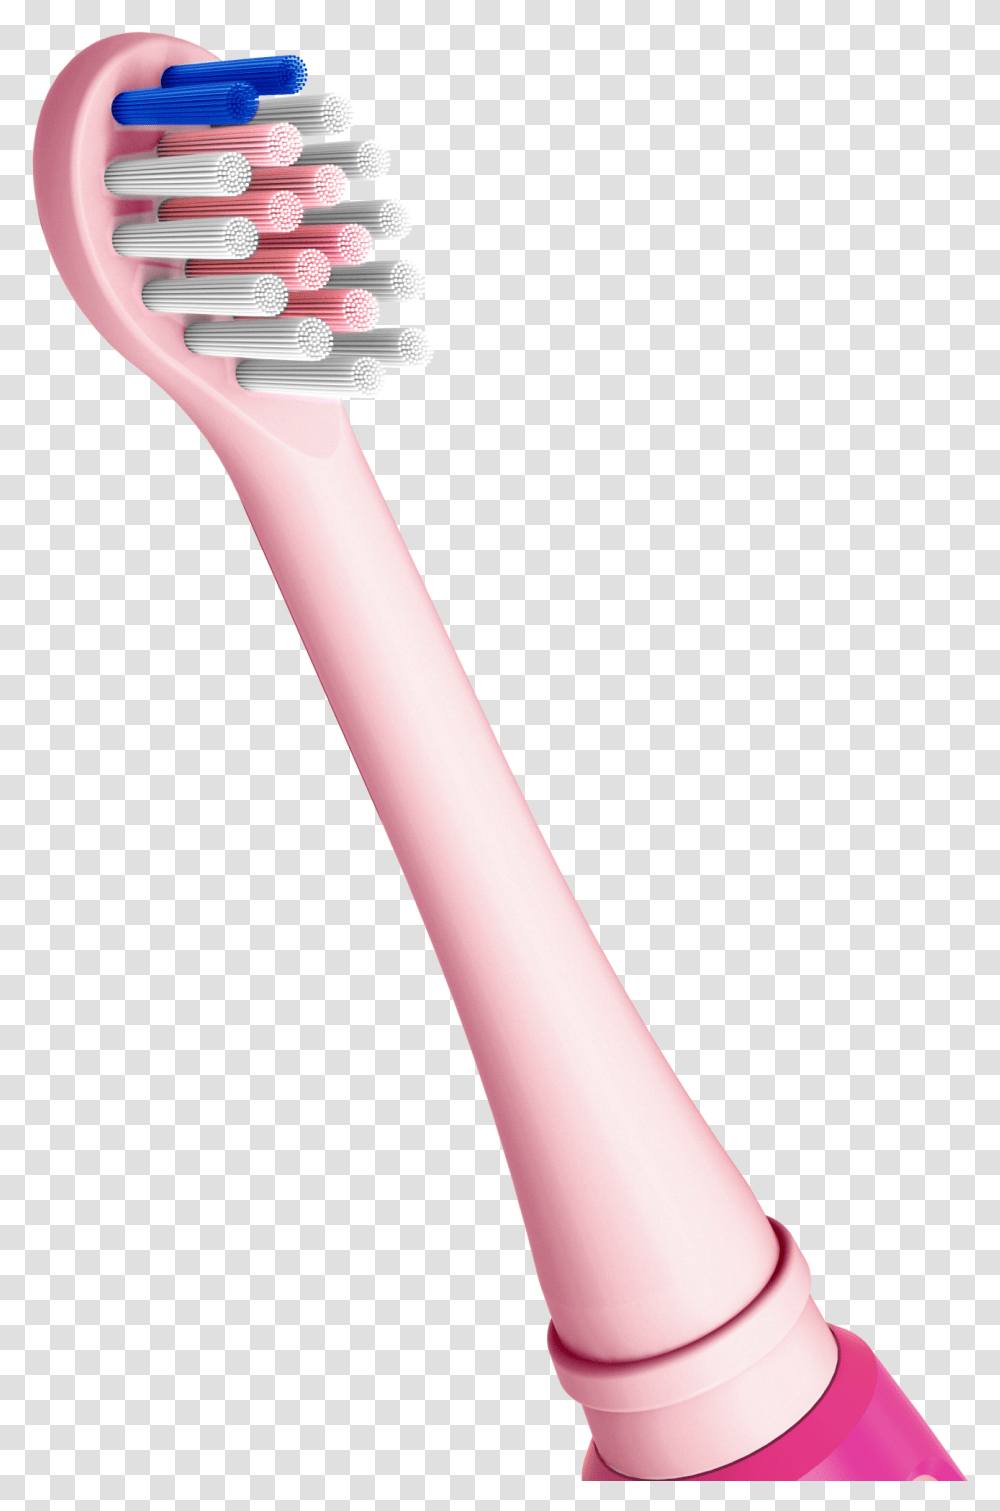 Electric Toothbrush Tooth Brushing Teeth Cleaning Vibration Escova De Dente Desenho Rosa, Tool Transparent Png